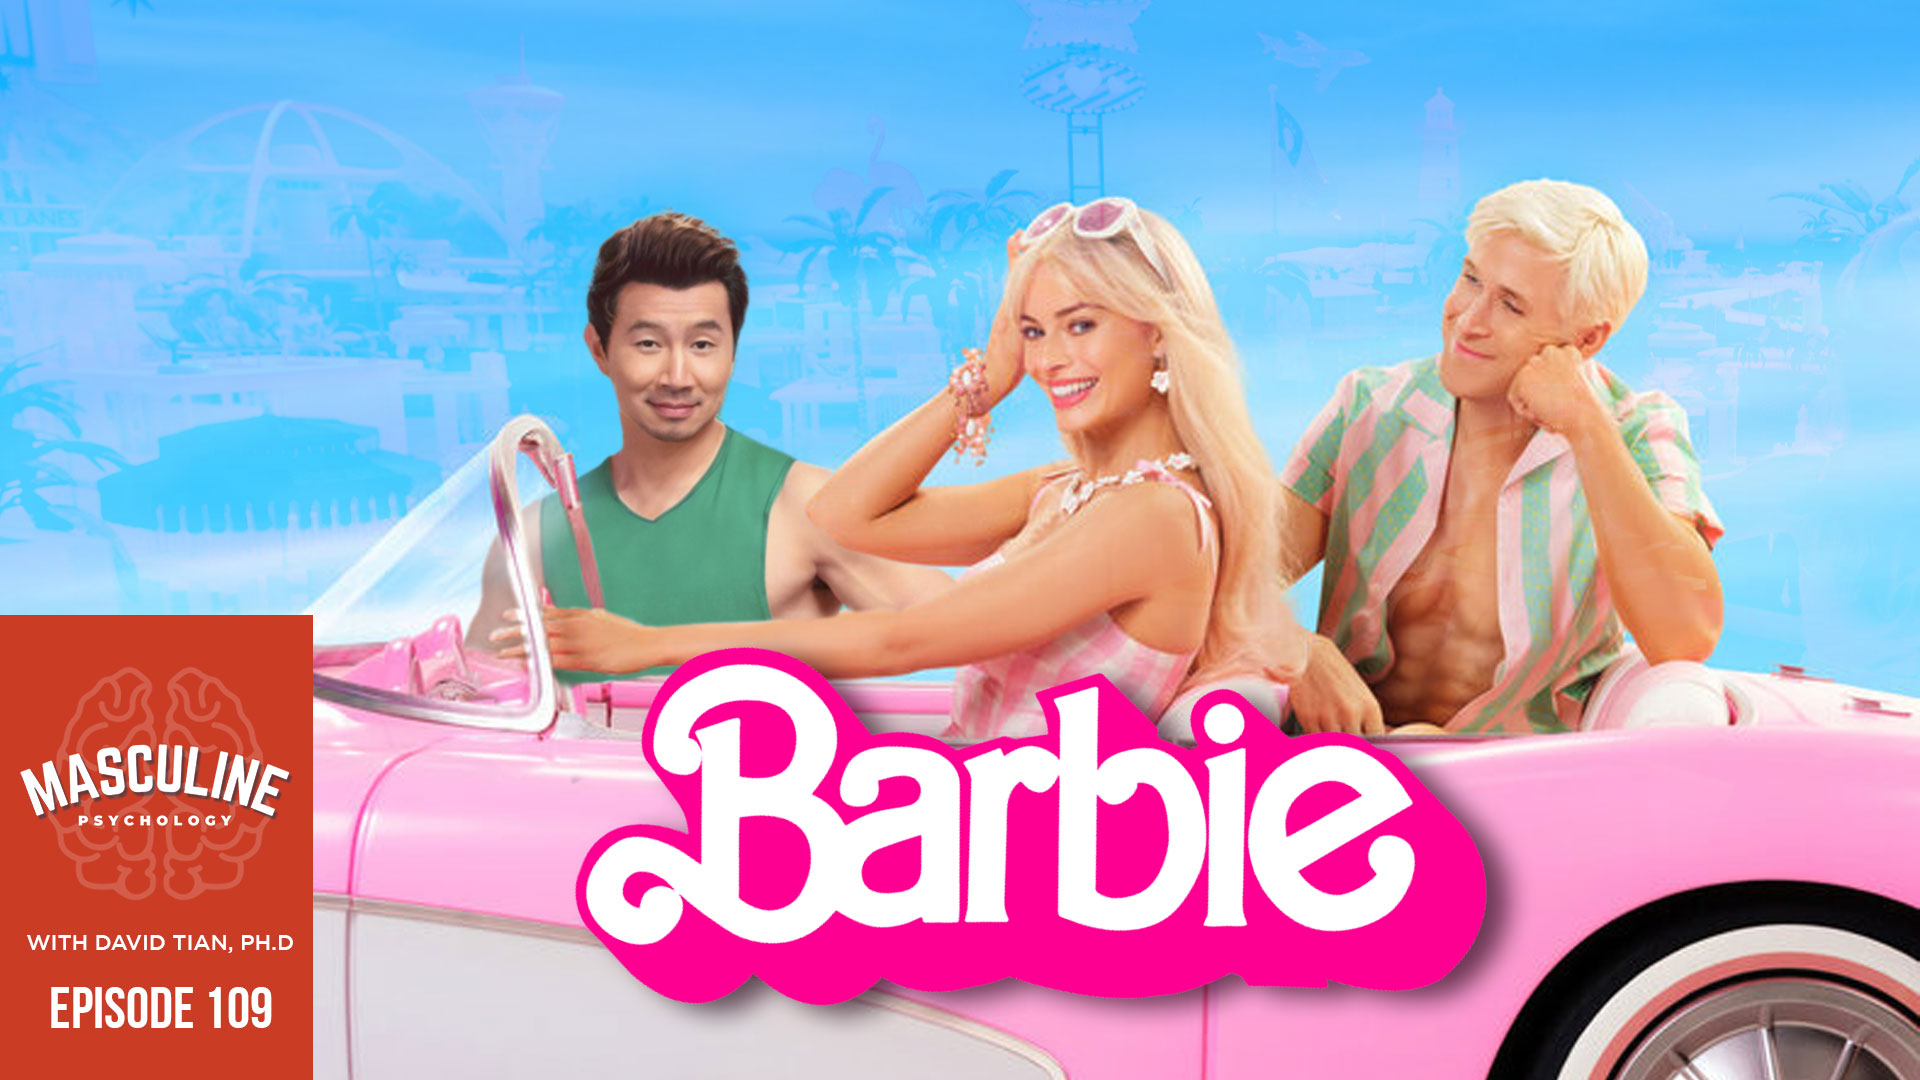 Simu Liu's parents ordered 20 of his 'Barbie' Ken dolls to gift friends:  'They can't believe it